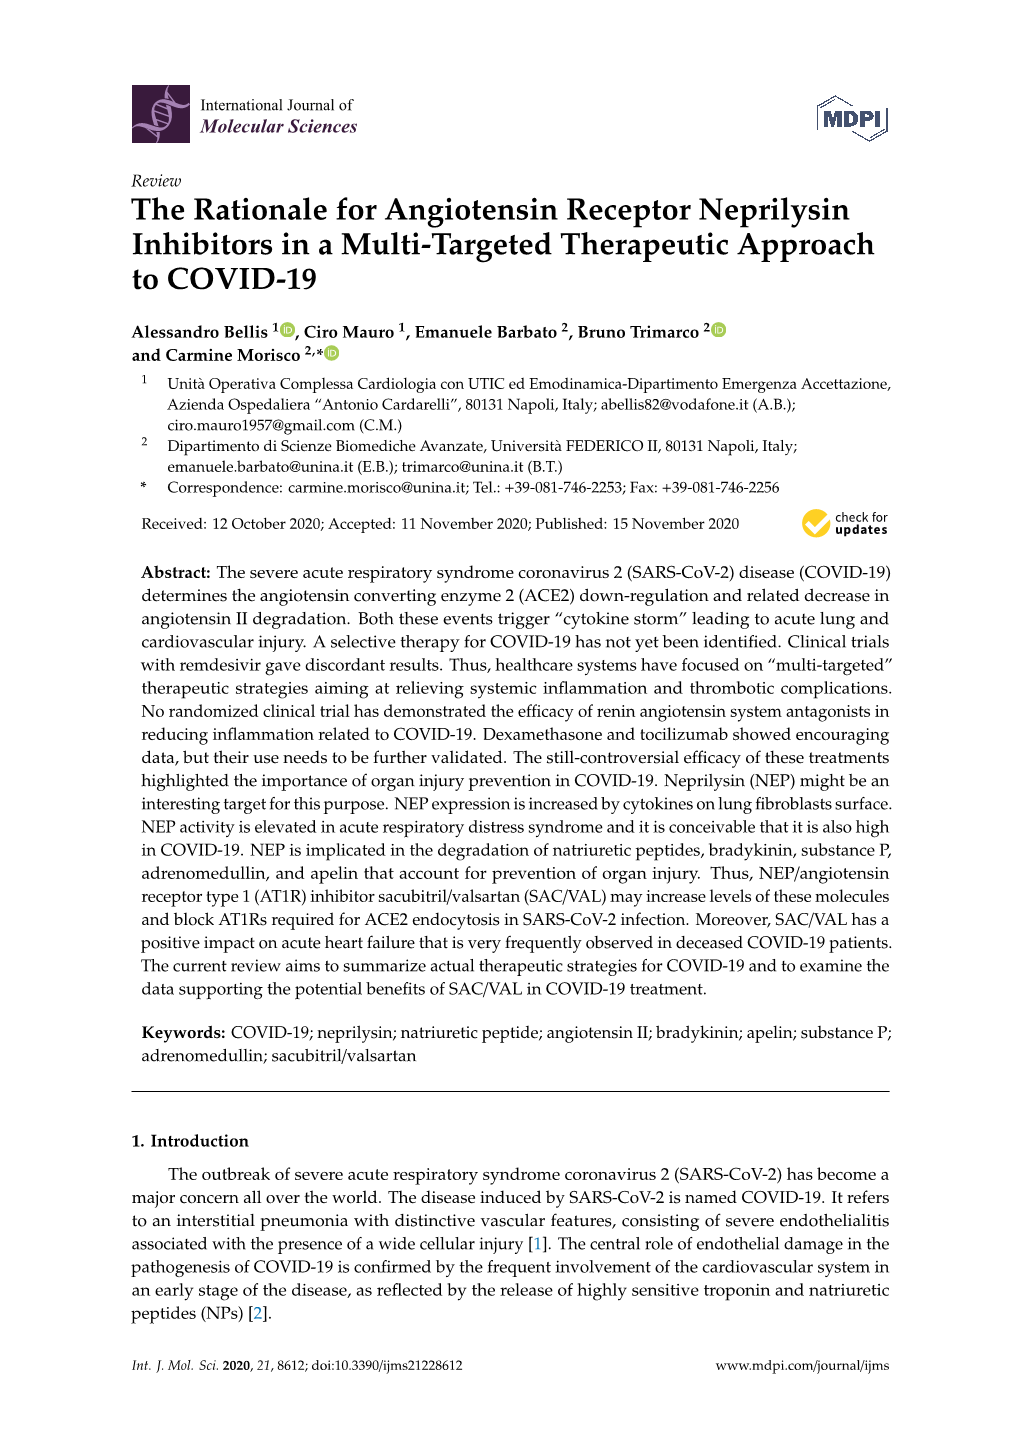 The Rationale for Angiotensin Receptor Neprilysin Inhibitors in a Multi-Targeted Therapeutic Approach to COVID-19